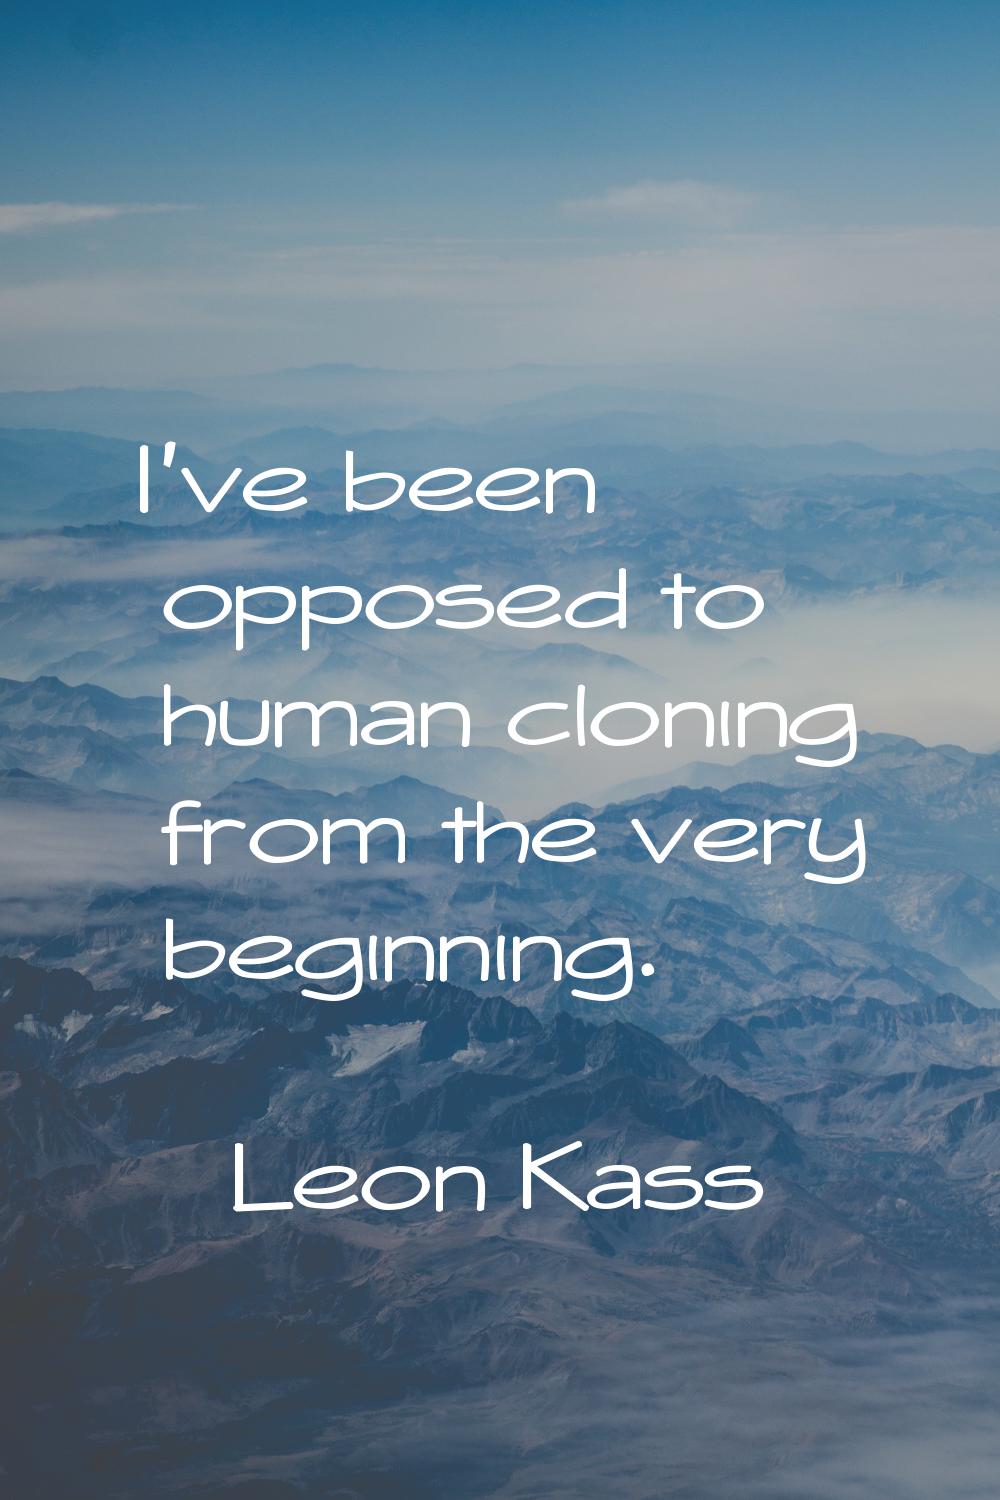 I've been opposed to human cloning from the very beginning.